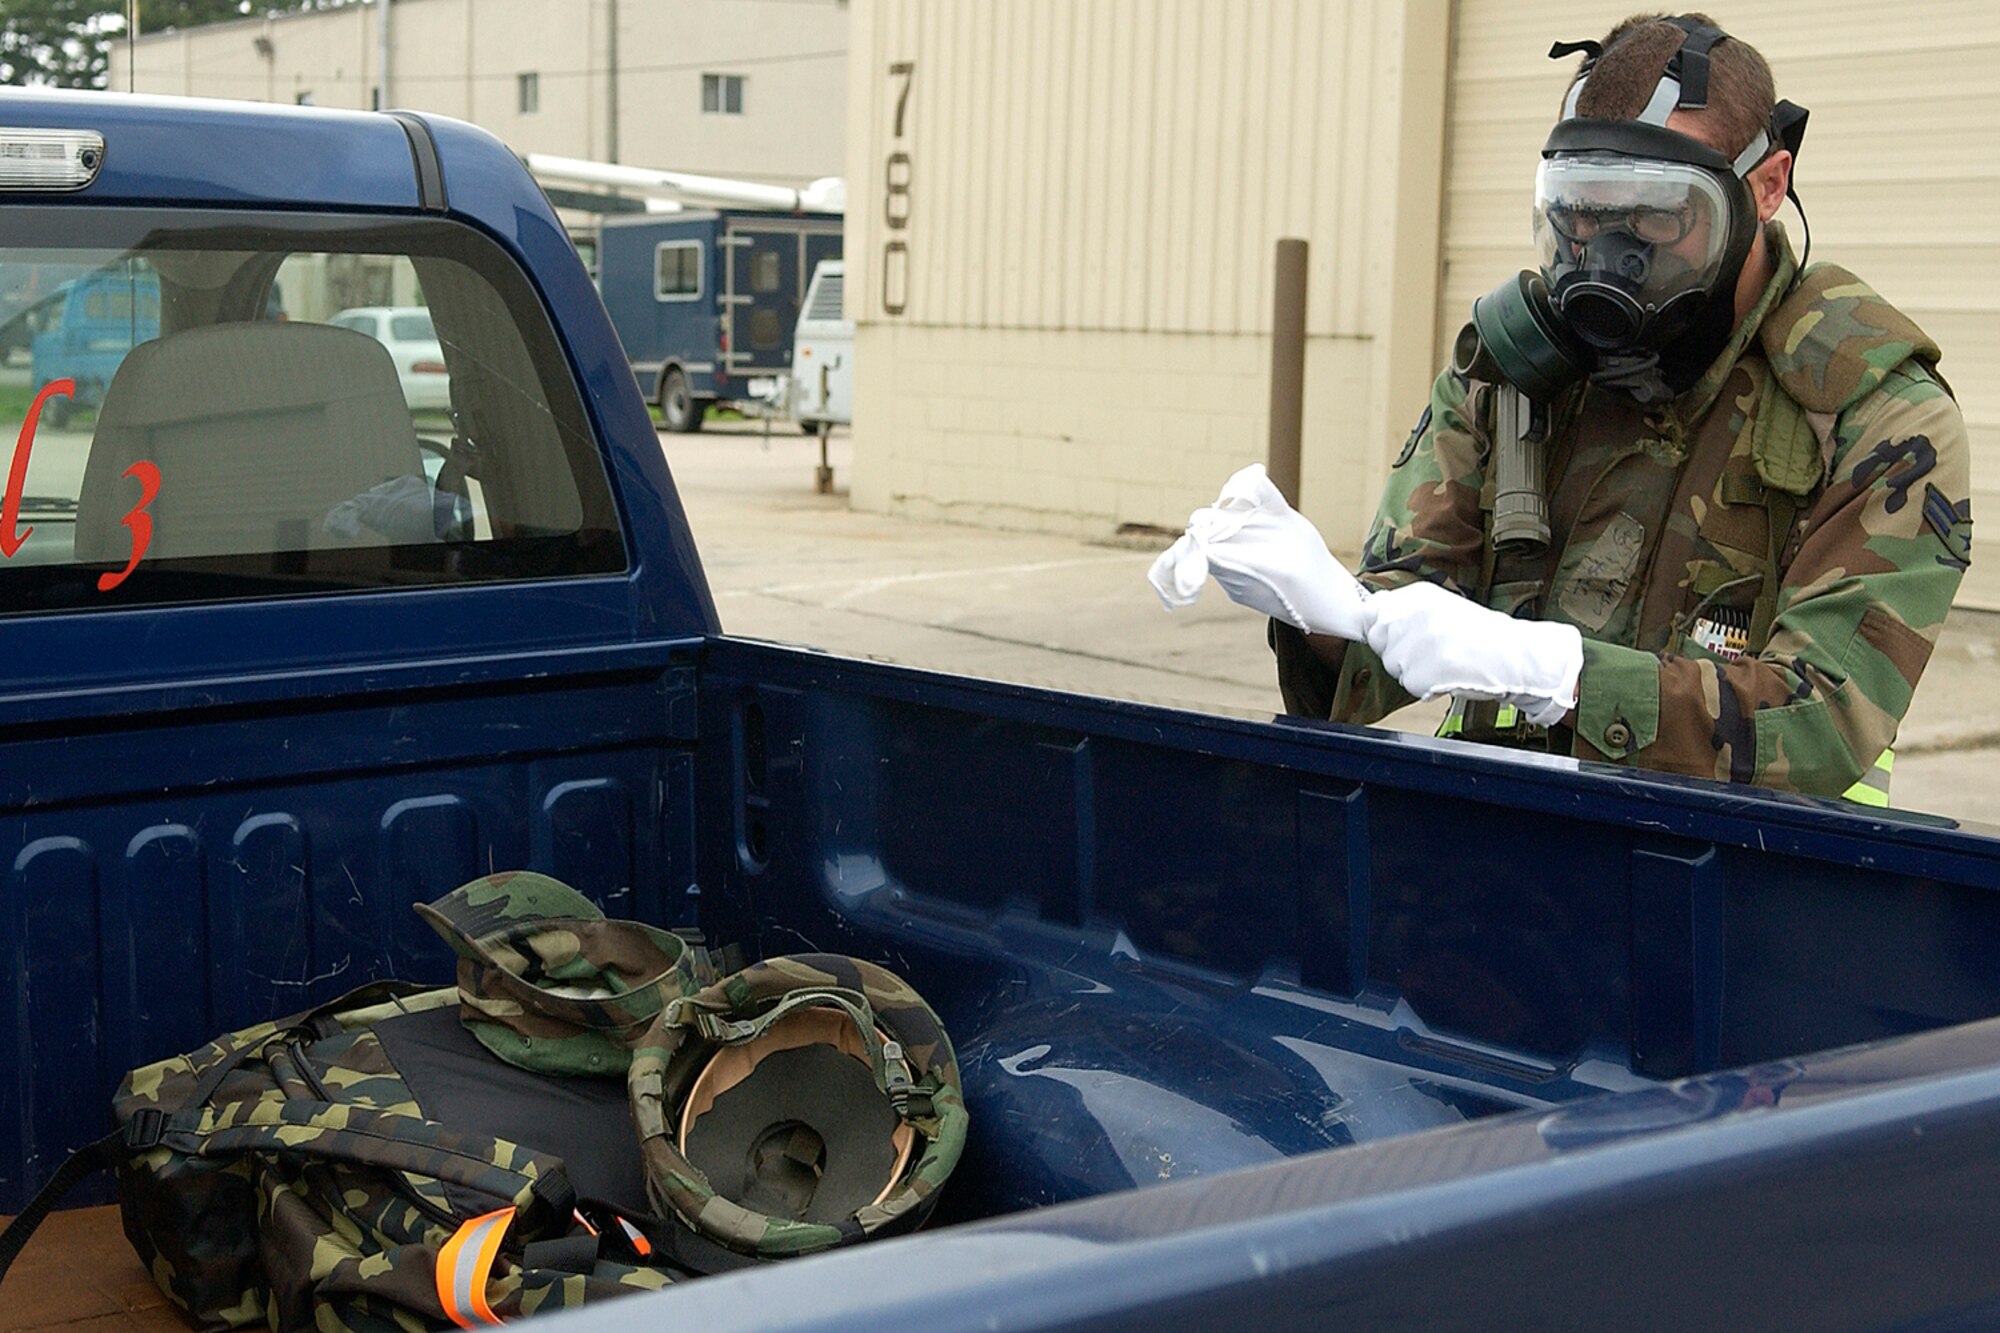 Airman 1st Class Gatter Justin, 8th Civil Engineer Squadron, puts on his chemical warfare gear to complete driver training during Wolf War Days exercise on July 16, 2007.  The two-day exercise prepares 8th Fighter Wing Airman for the upcoming Korean peninsula exercise next week along with potential real world scenarios. (U.S. Air Force photo by Senior Airman Giang Nguyen)                             